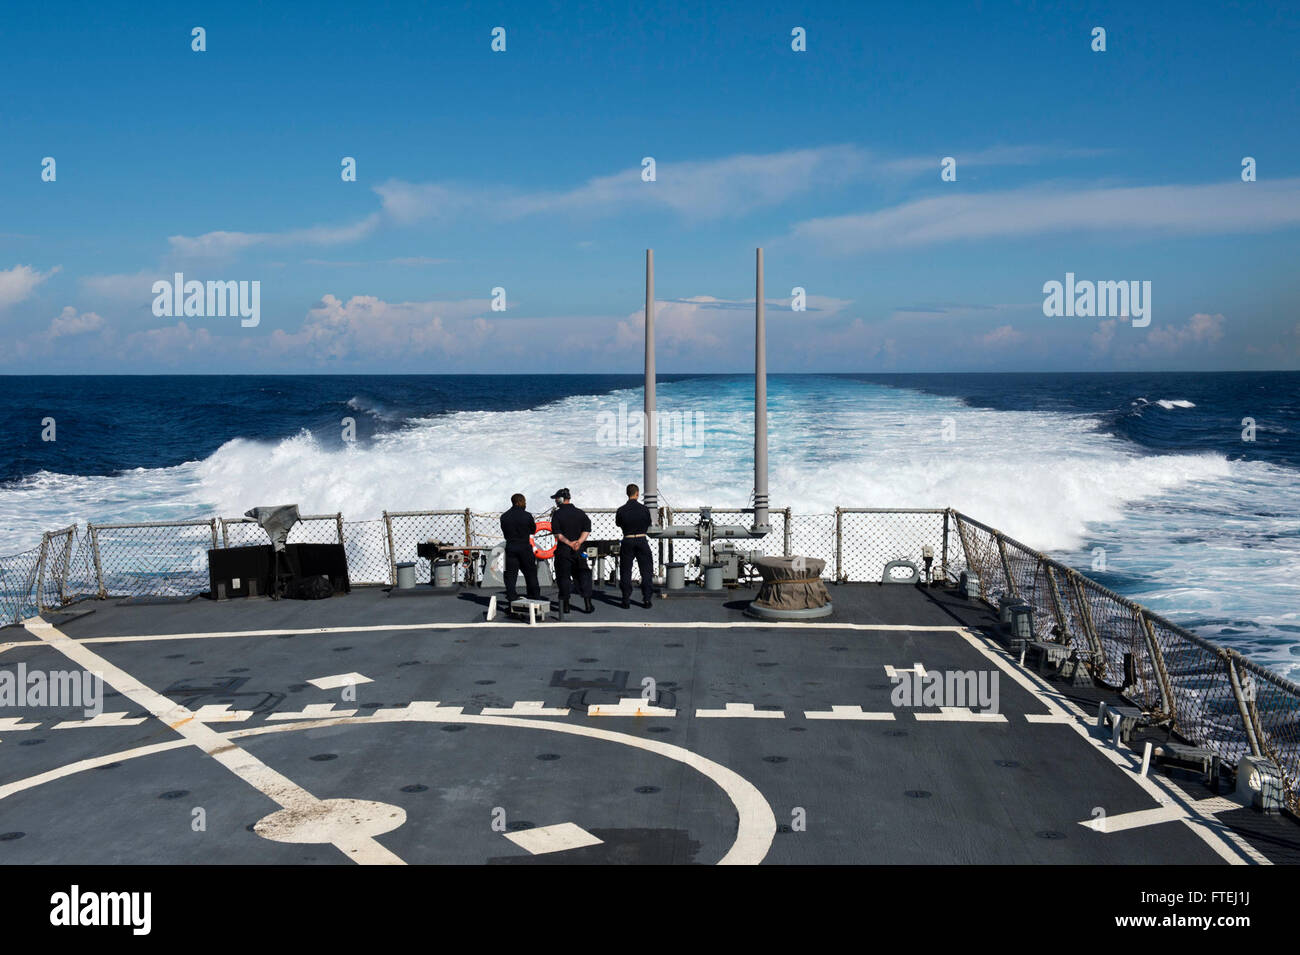 MEDITERRANEAN SEA (Oct. 29, 2014) – Sailors look at the wake from the Arleigh Burke-class guided-missile destroyer USS Ross (DDG 71). Ross, homeported in Rota, Spain, is conducting naval operations in the U.S. 6th Fleet area of operations in support of U.S. national security interests in Europe. Stock Photo